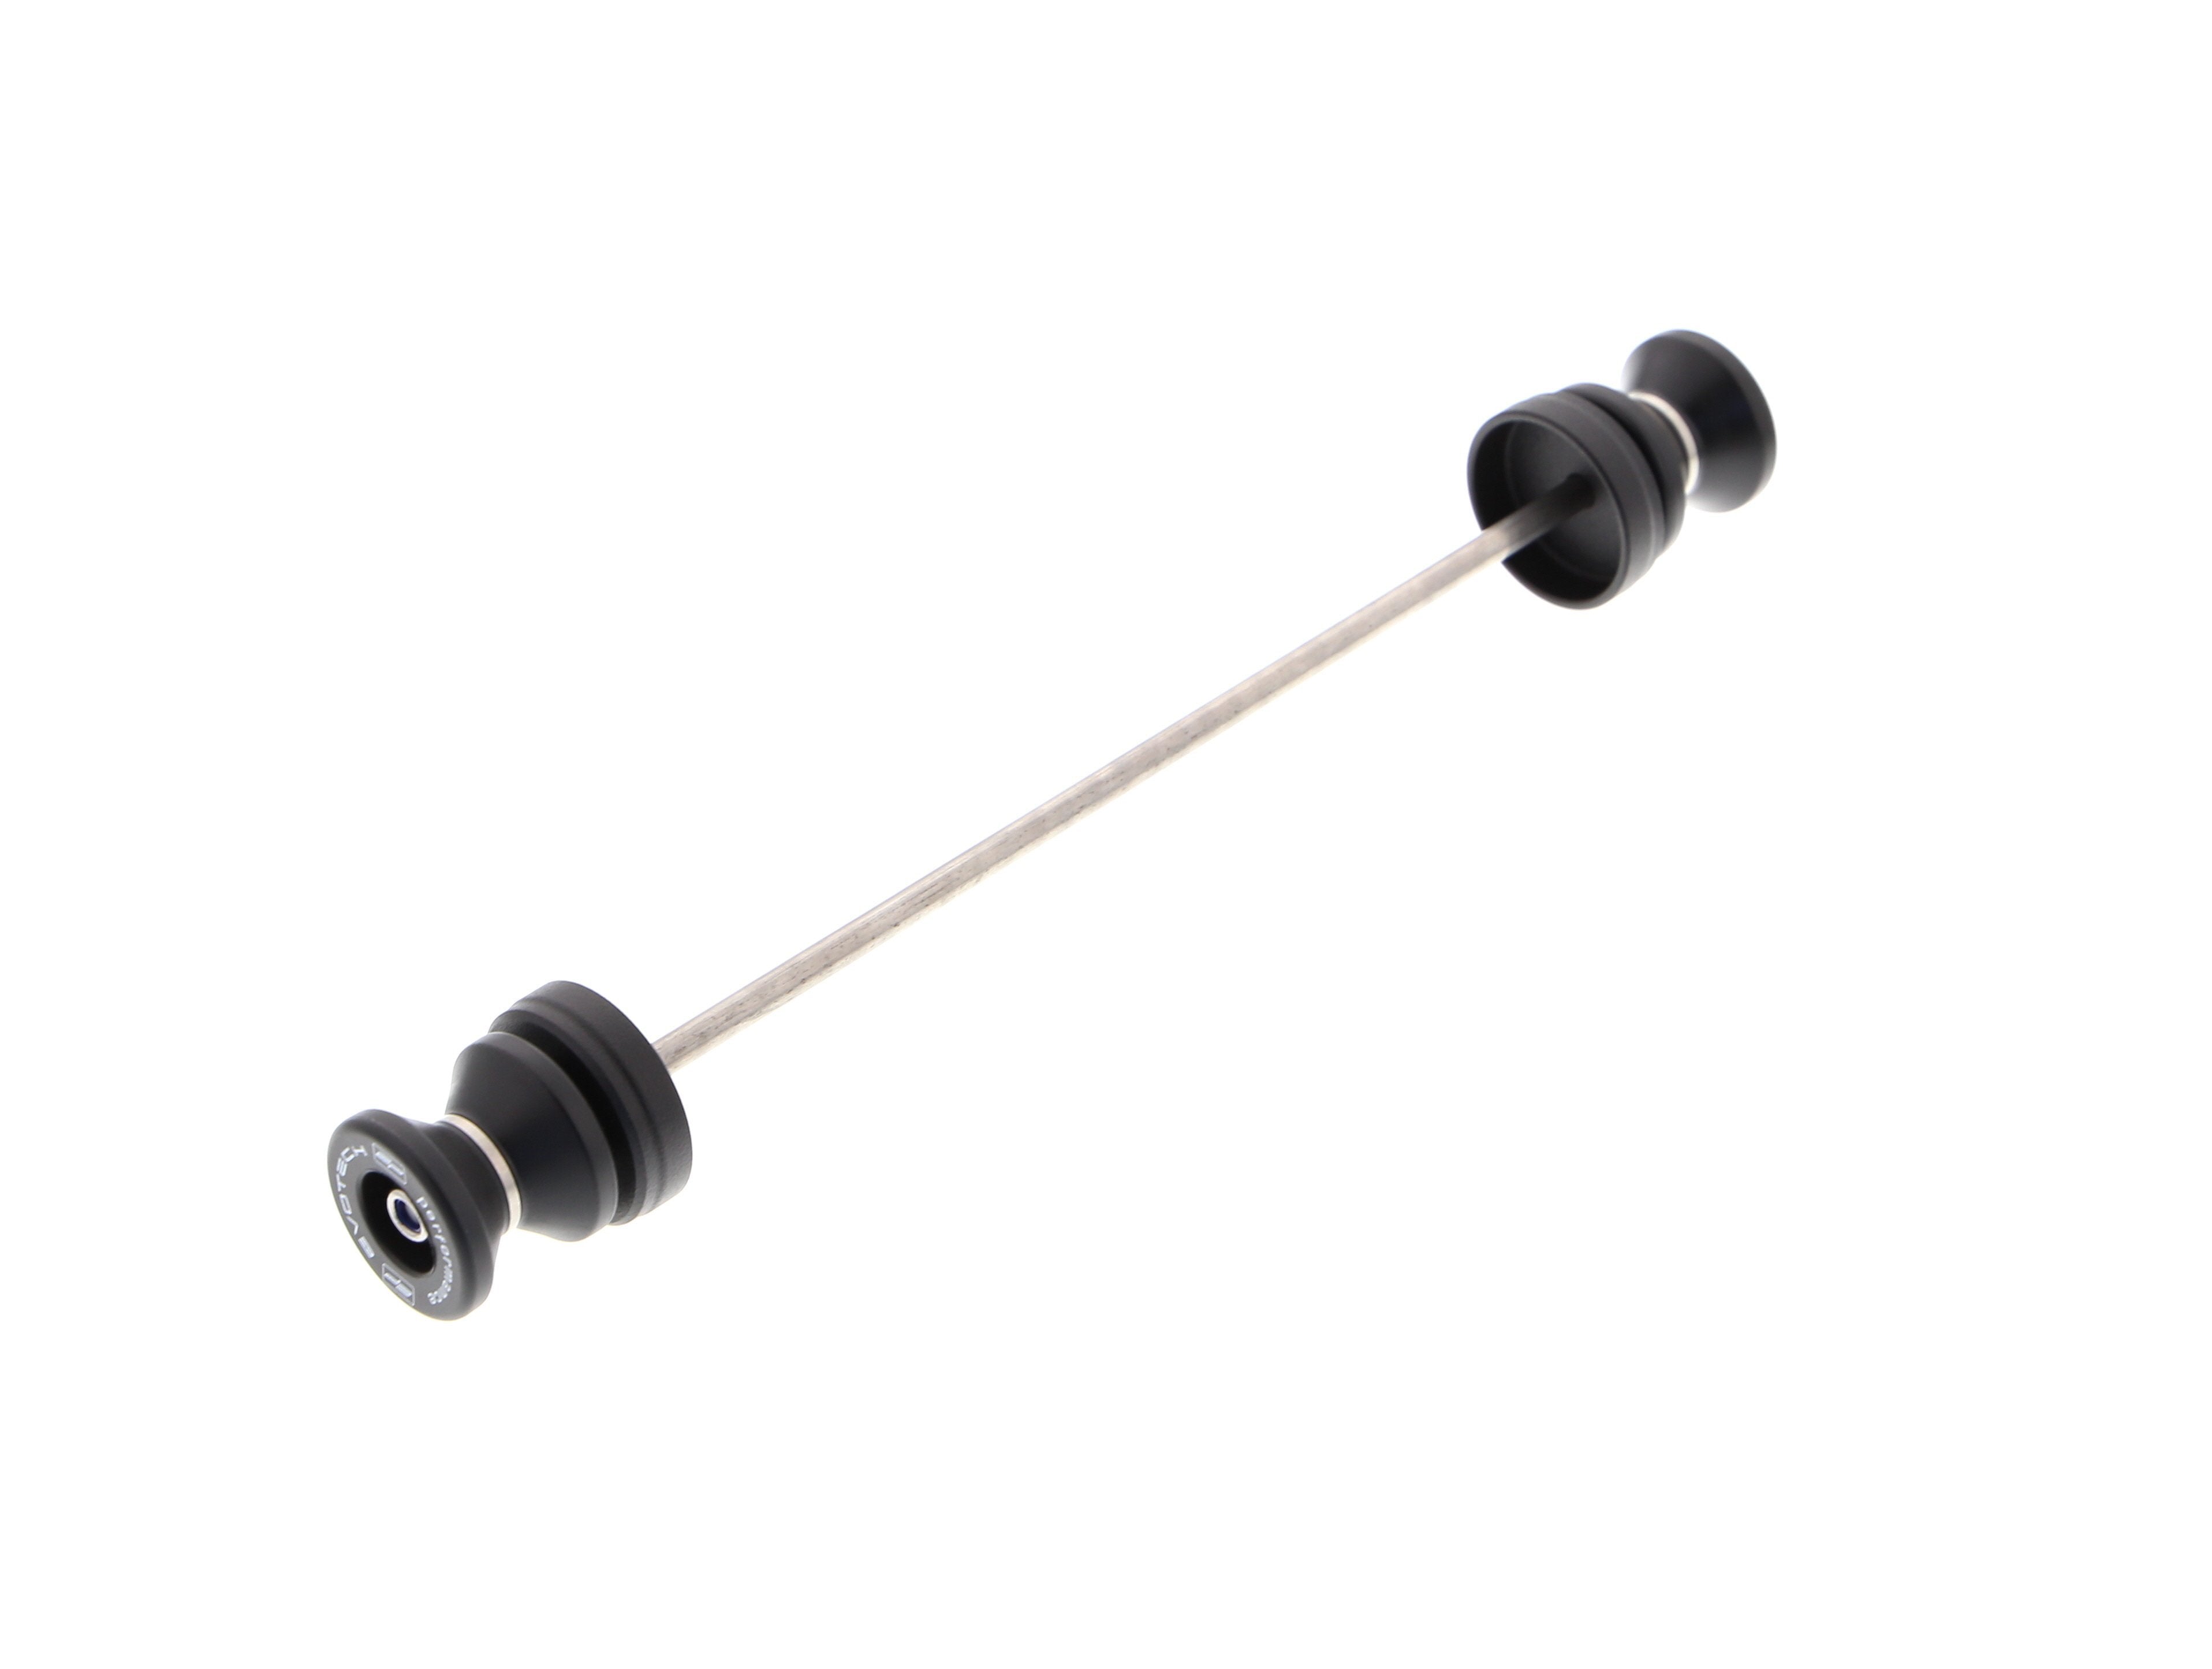 EP Paddock Stand Bobbins for the Ducati Scrambler Italia Independent comprises a spindle rod with EPâs signature nylon paddock stand bobbins either end with precision shaped aluminium spacer.